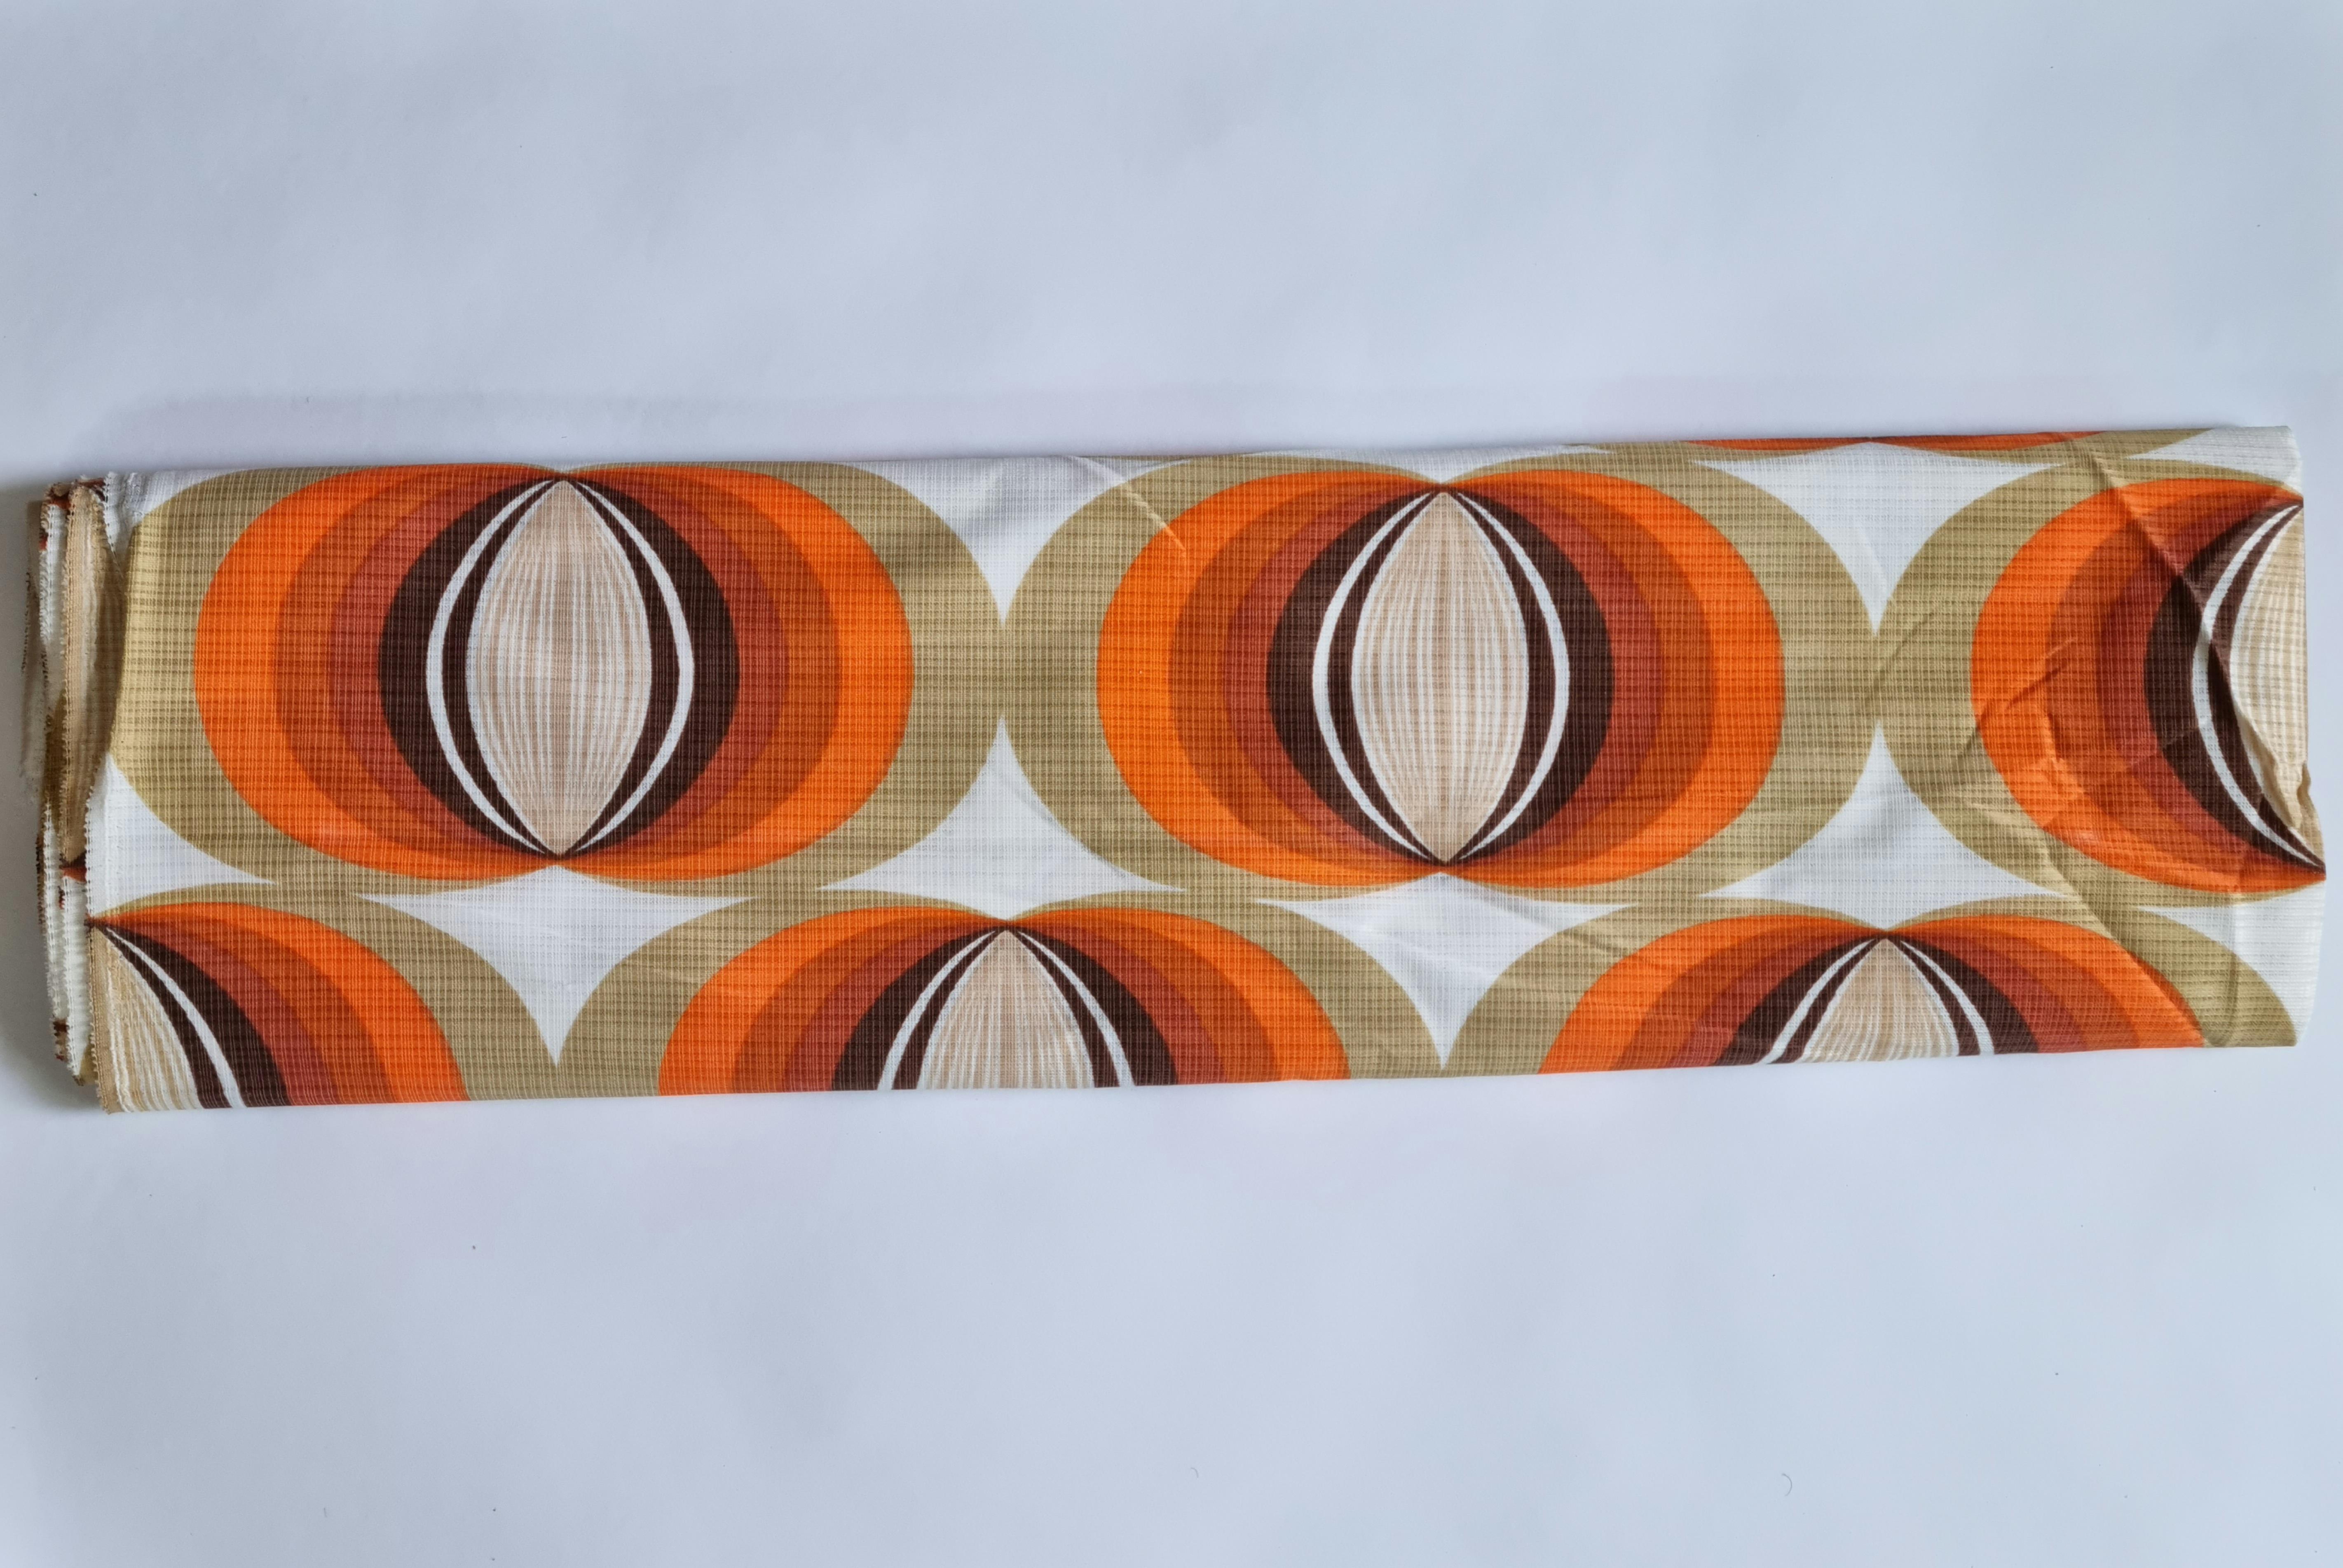 German Midcentury Large Cloth, Fabric or Textile in Style of Panton Verner, 1960s For Sale